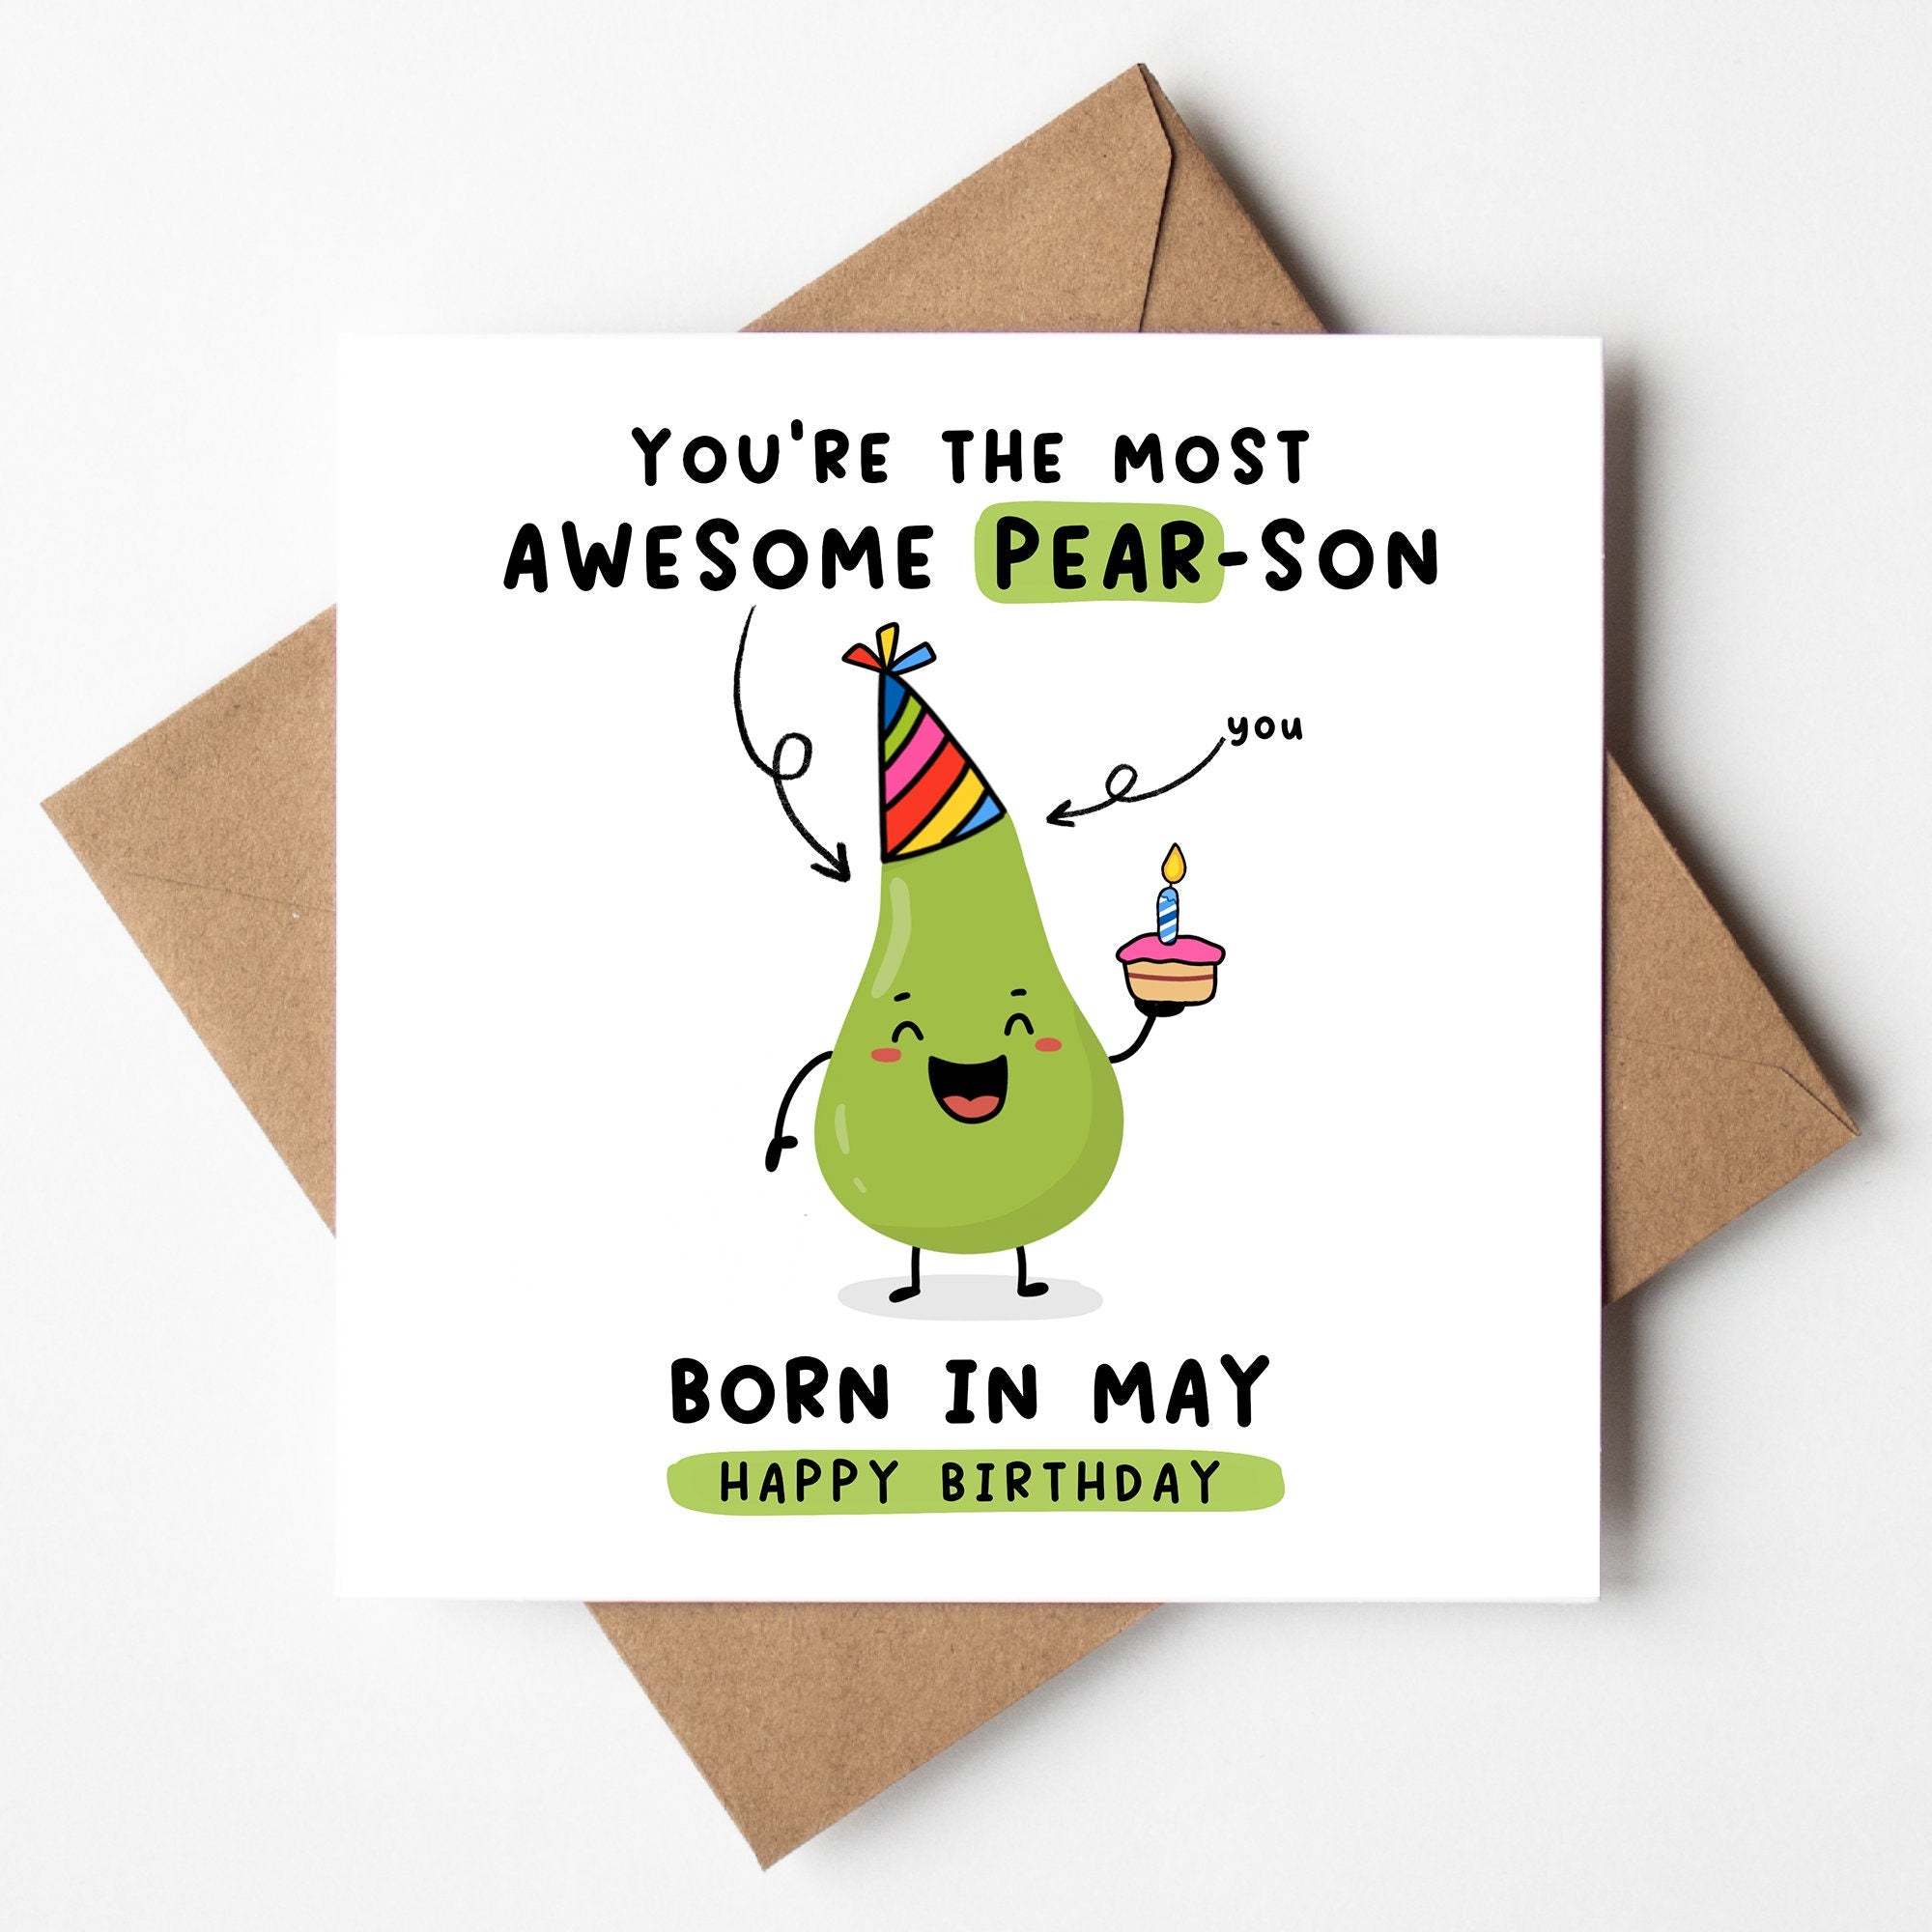 You're The Most Awesome Pear-son born in May, Funny Pun Card, Pear Pun Card, Born In May, Birth Month Card May